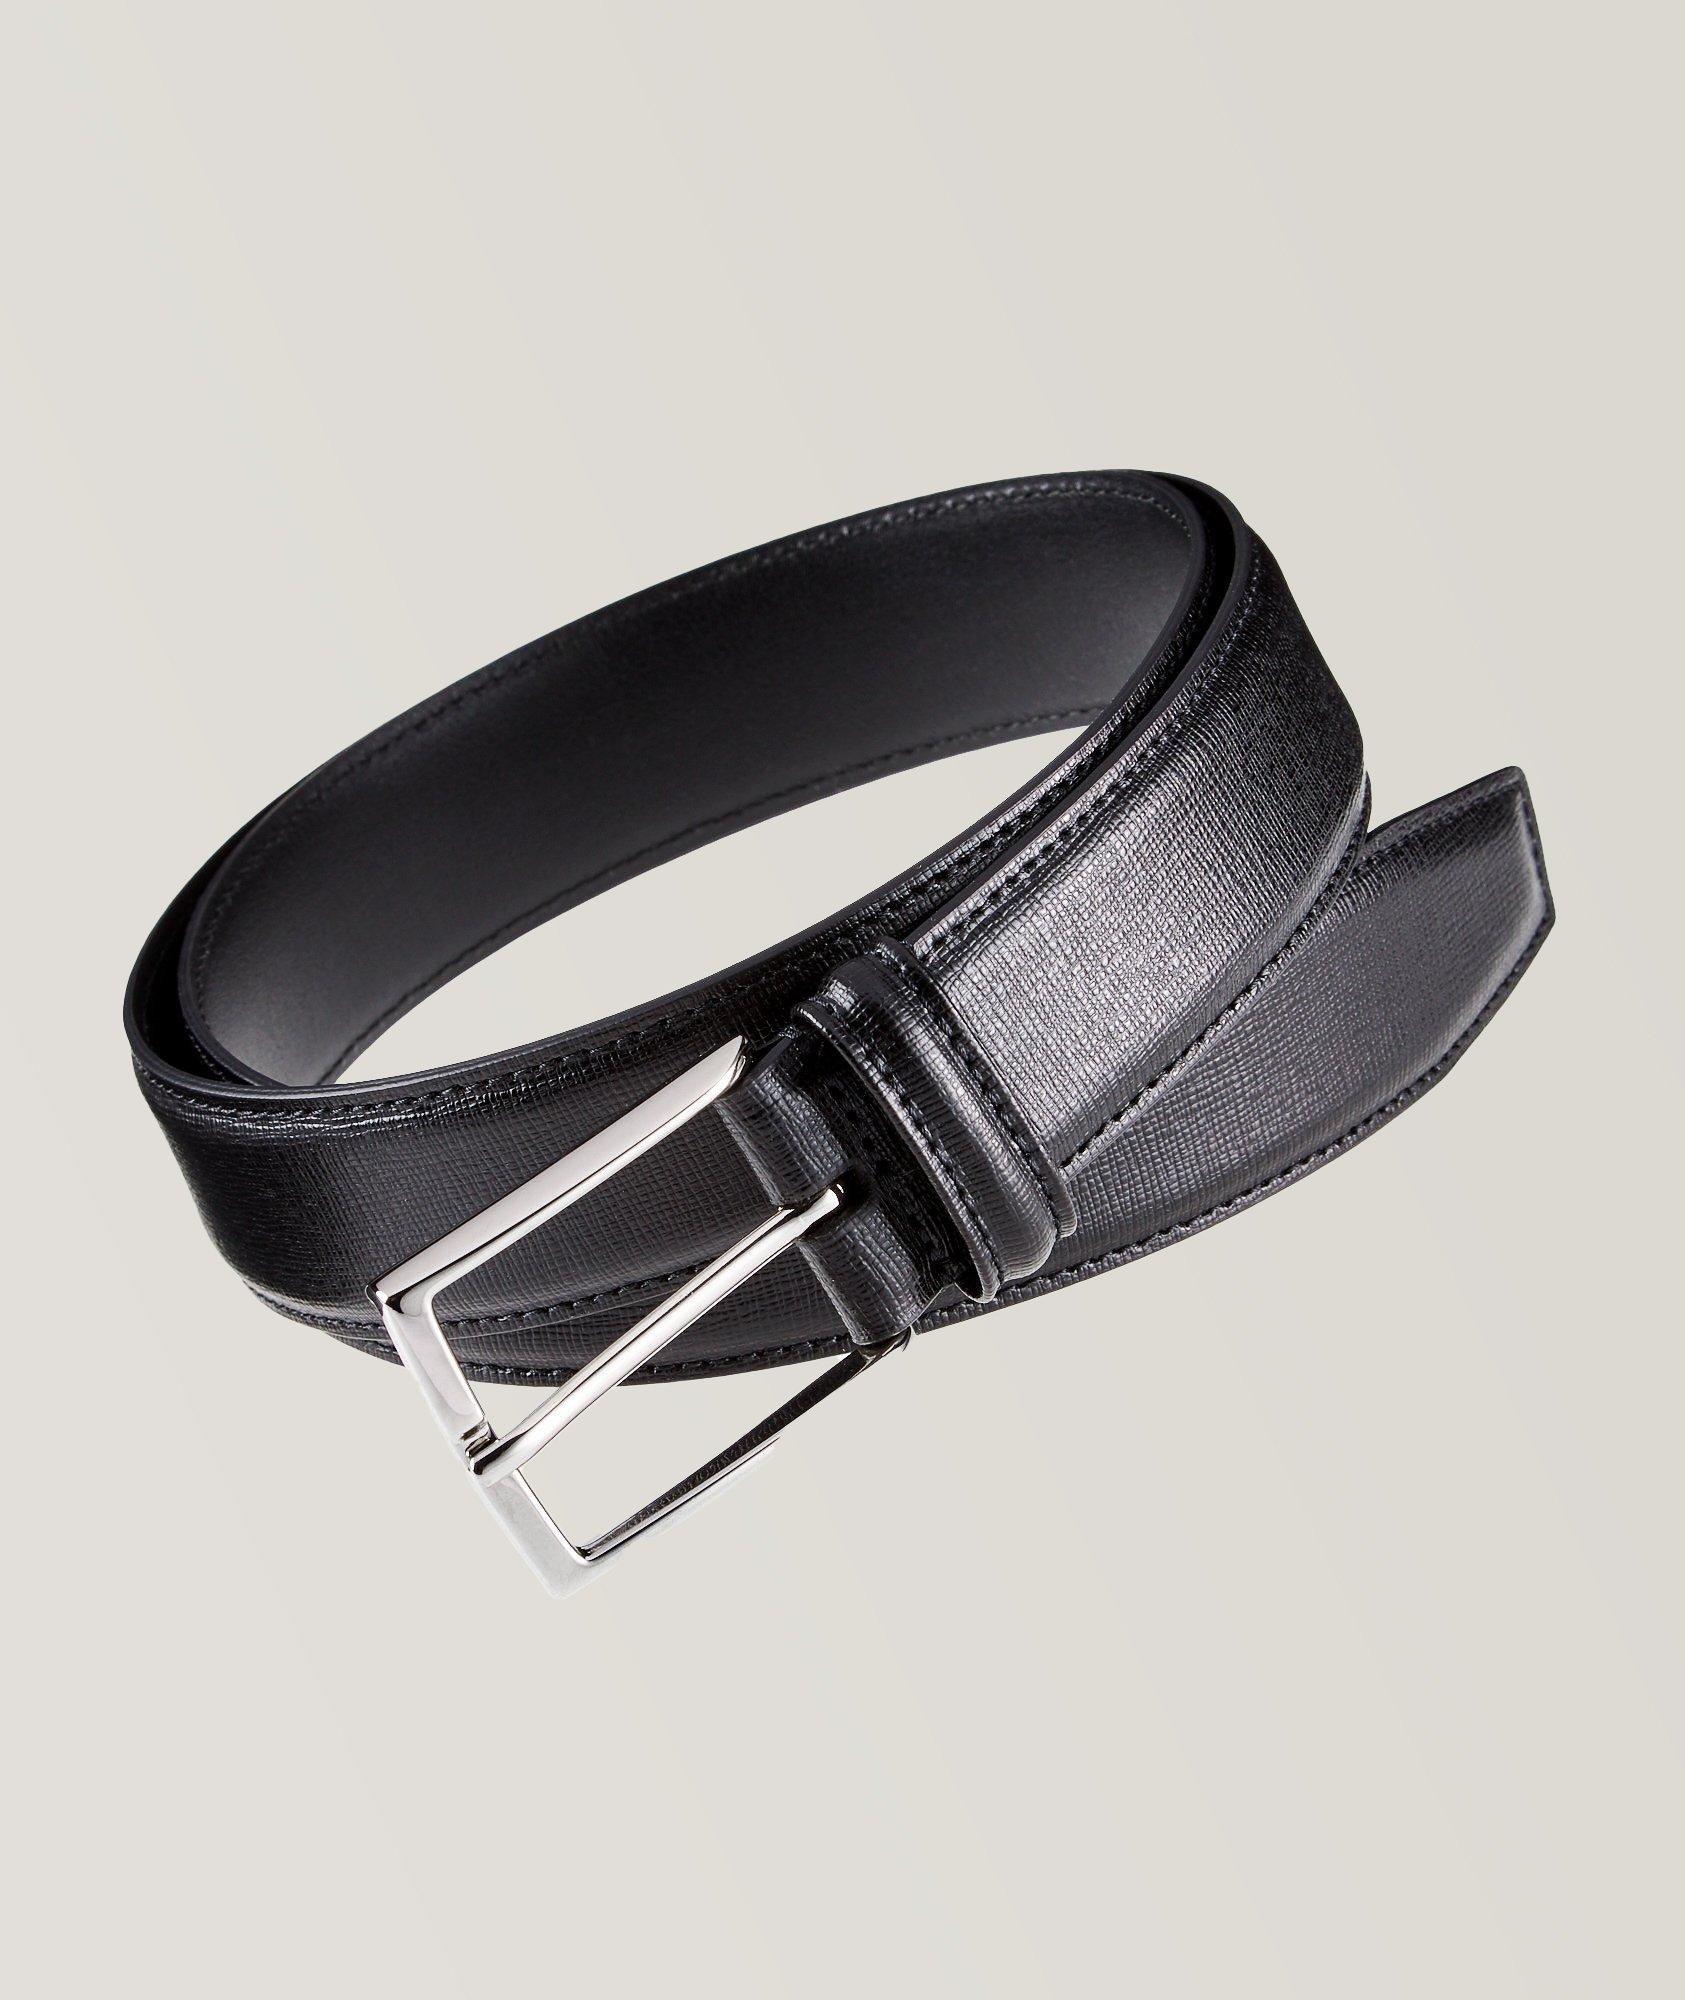 Anderson's Saffiano Leather Square Pin-Buckle Belt, Belts